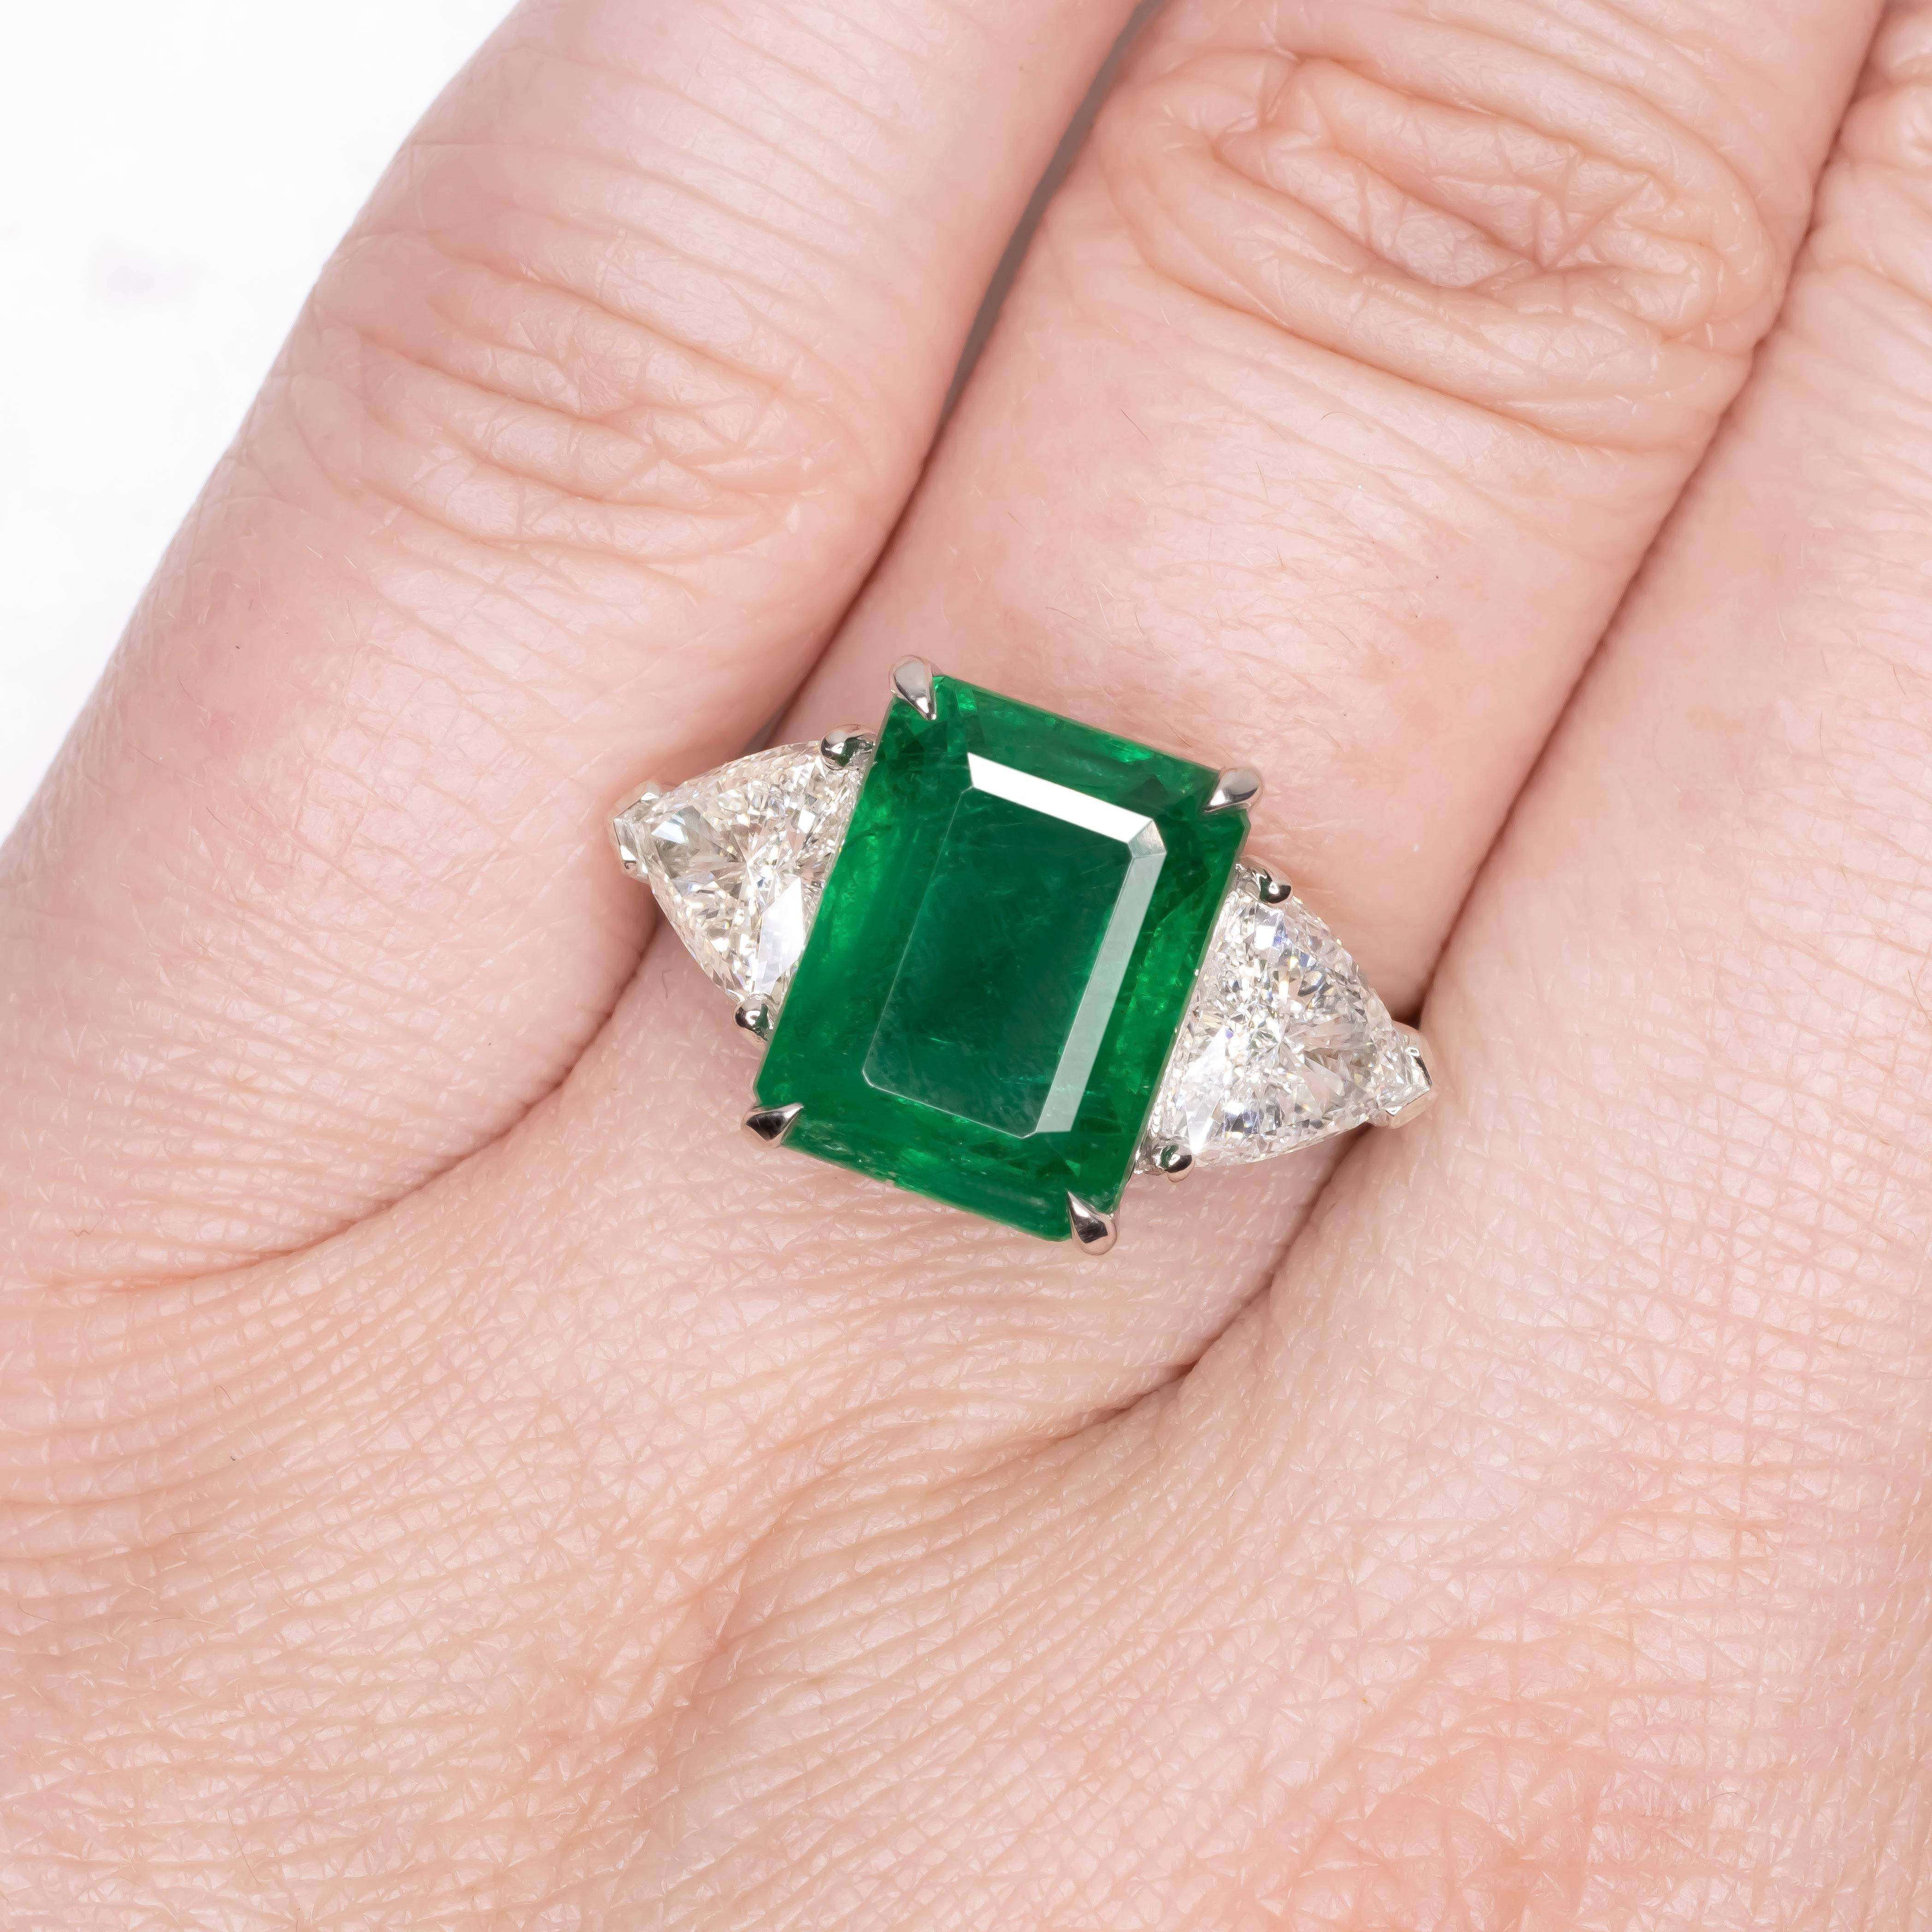 Indulge in the elegance of this Antinori di Sanpietro platinum ring, where luxury meets perfection. At its heart is a breathtaking 6.71-carat natural emerald, a gem of pure, vivid green that captivates with its enchanting luster. This emerald is